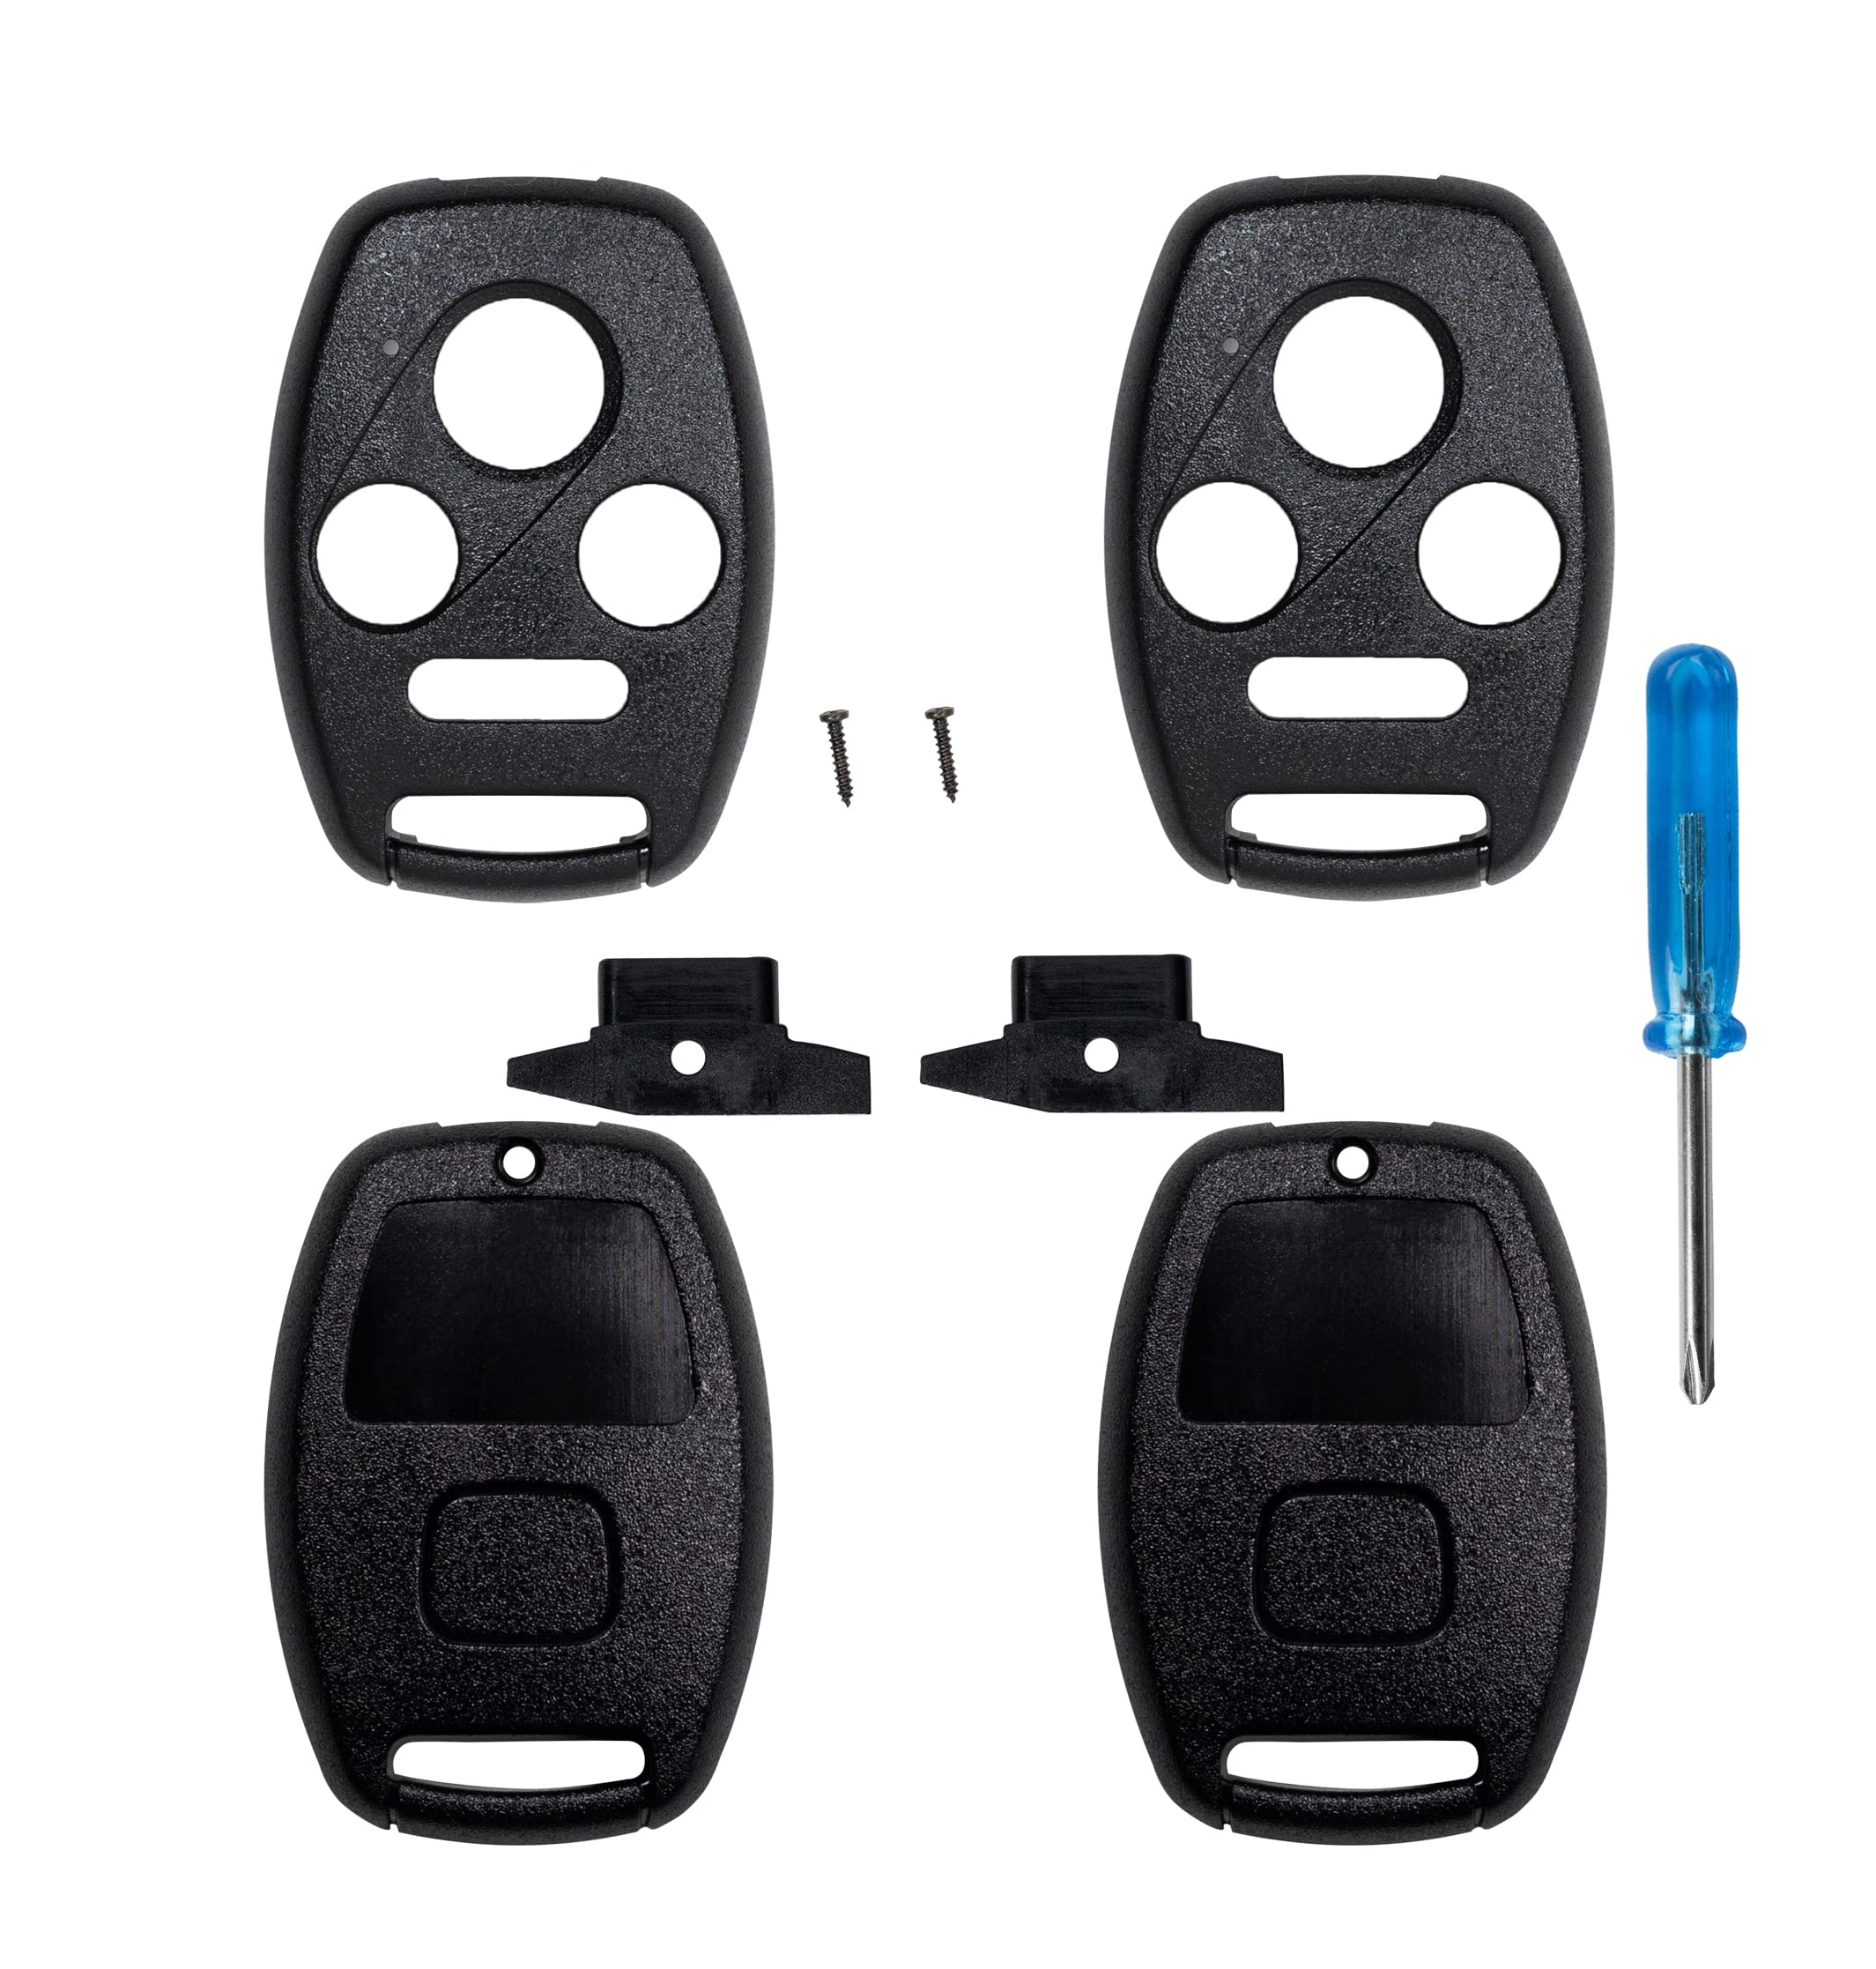 (Set of 2) Car Remote Head Key Shell Case for Honda Civic Accord Pilot Element CR-V (No Key Cutting Required)